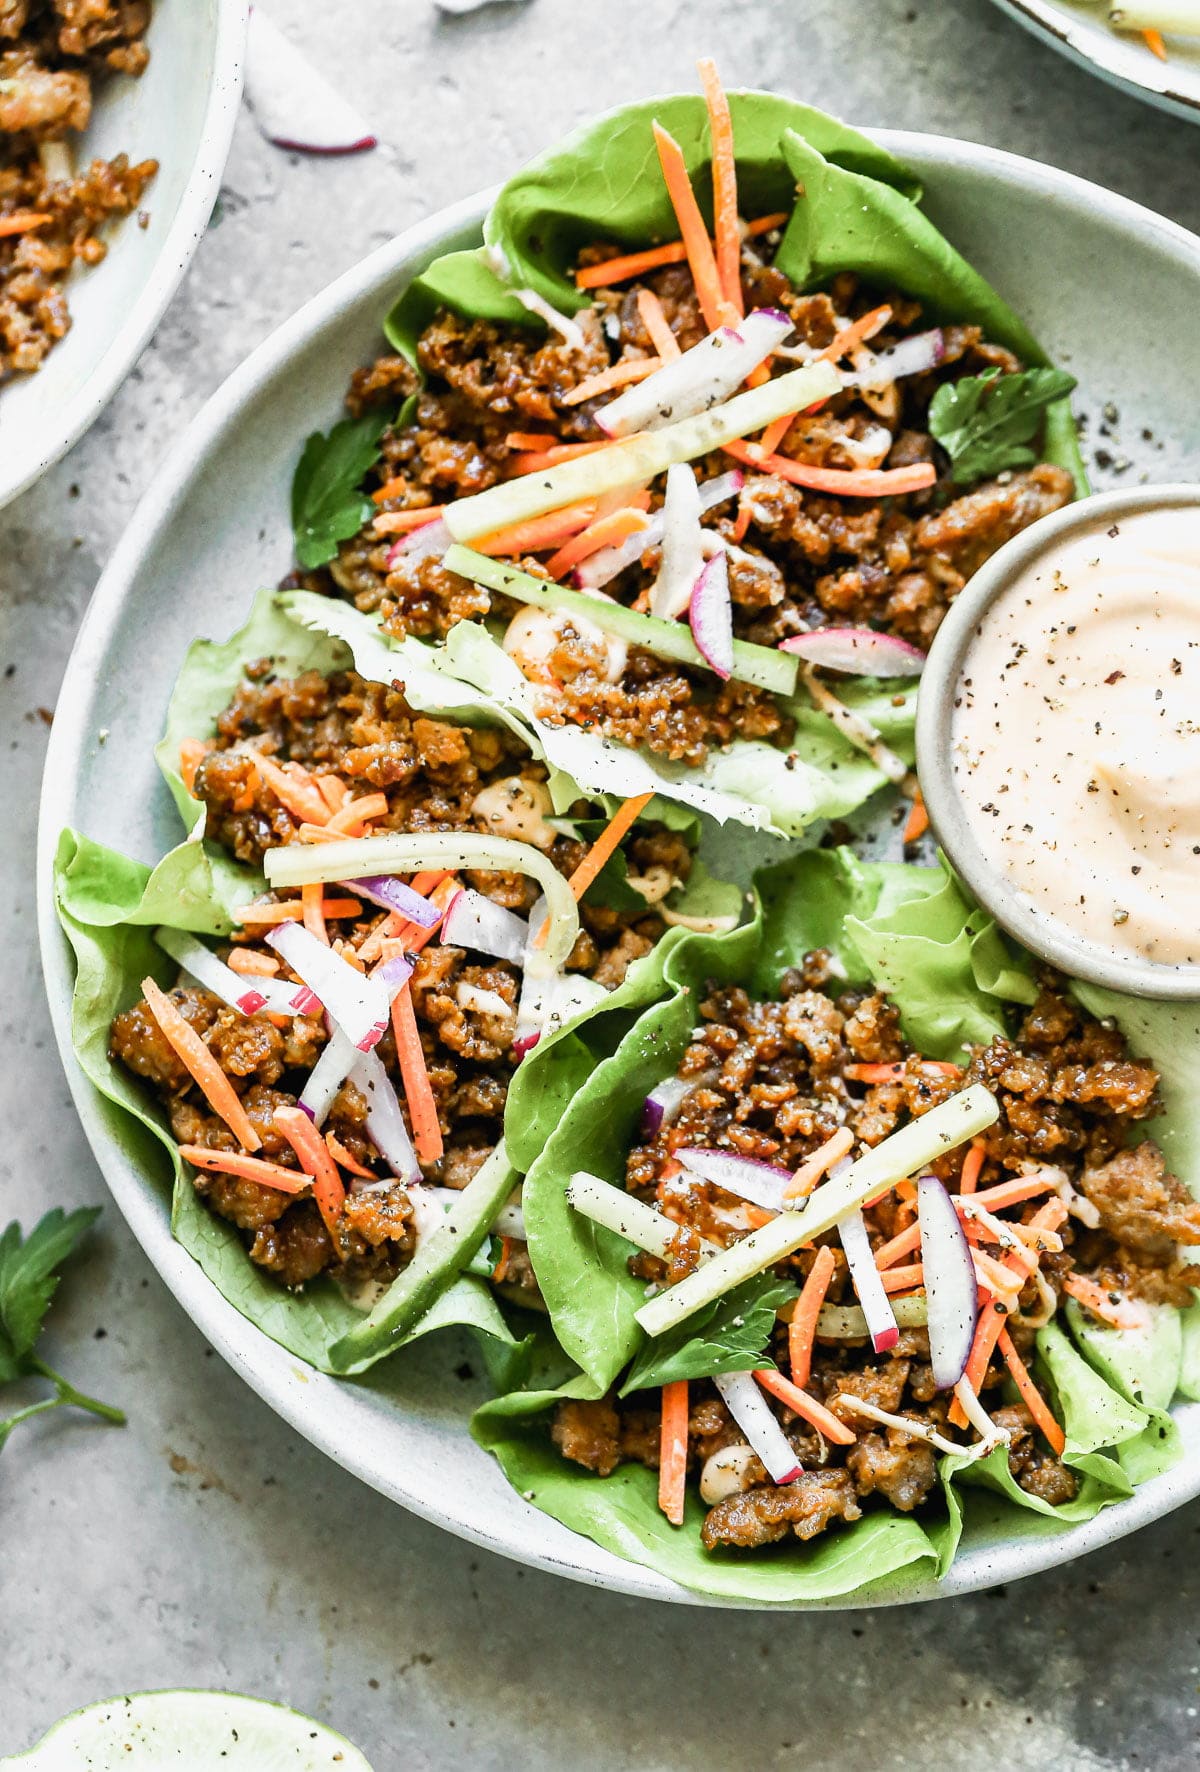 Let's take all of the flavors of a classic Banh Mi Sandwich&nbsp;deconstruct it and nestle everything into perfect little Vietnamese Lettuce Wraps. We will get crispy, salty ground pork, crisp veggies, with a sweet and spicy mayo&nbsp;drizzle in each&nbsp;drippy bite we take. And we will be happy.&nbsp;